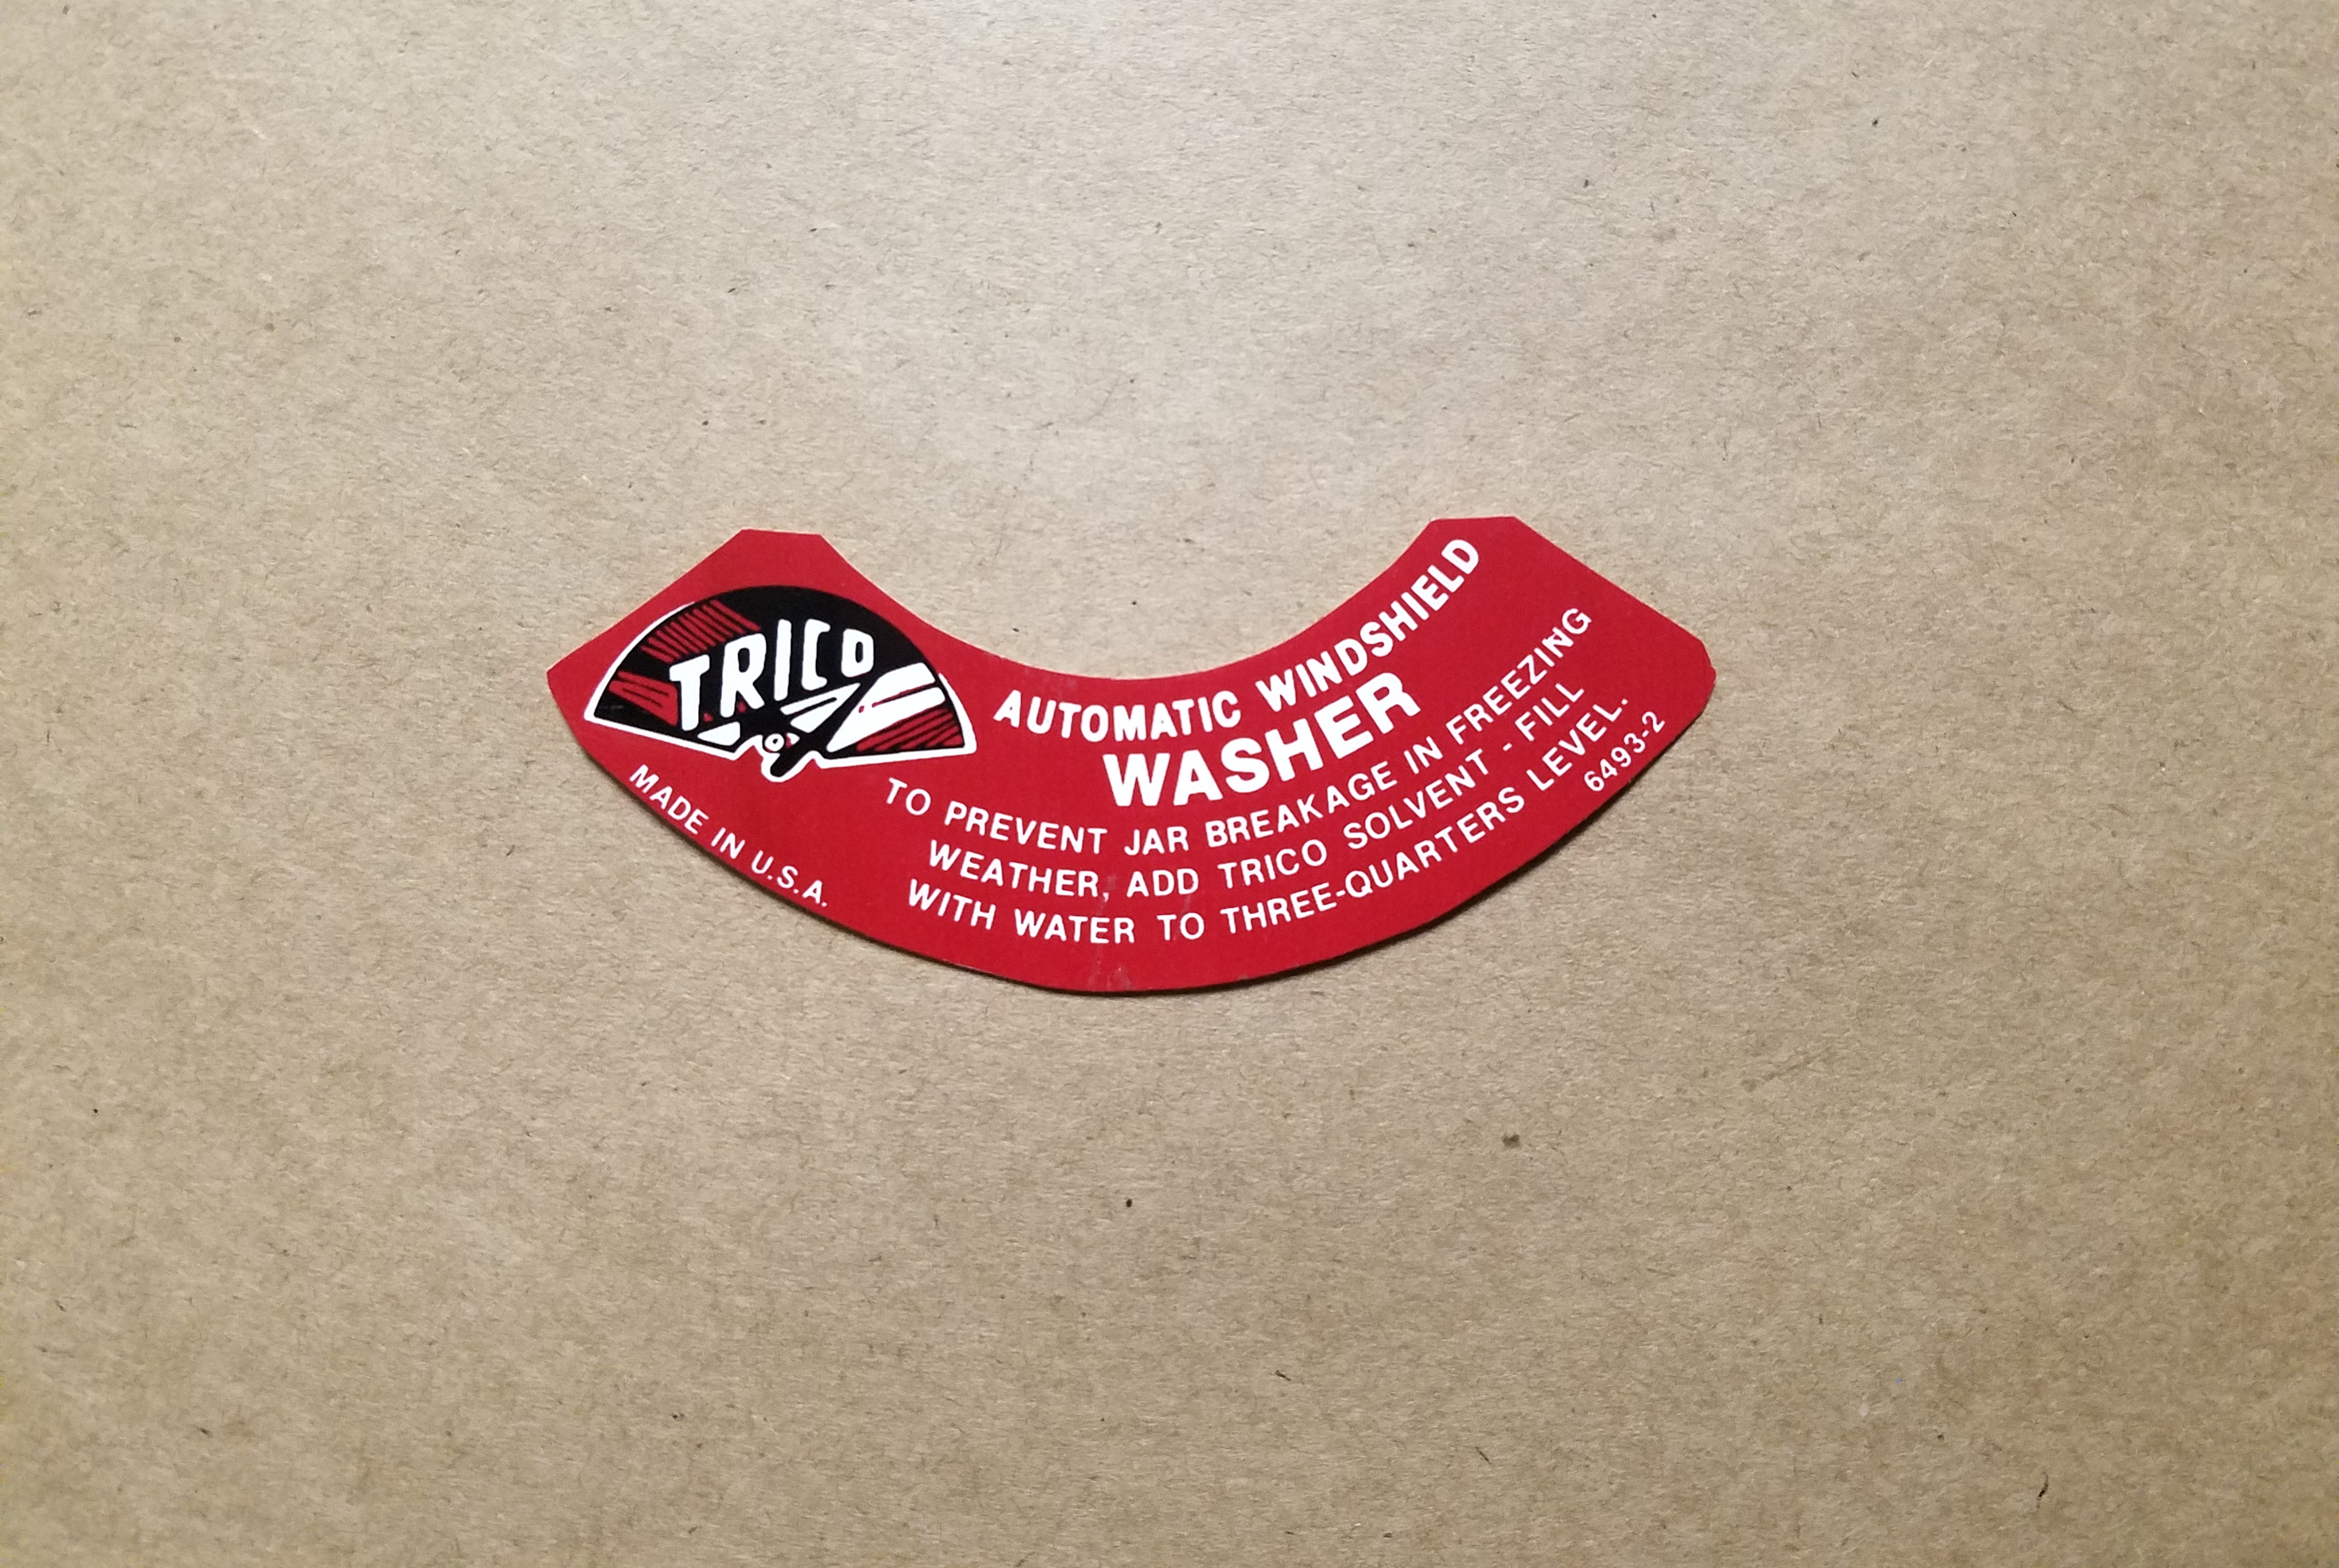 1940-60 Trico Windshield Washer Jar Lid Decal, on decal: 6493-2